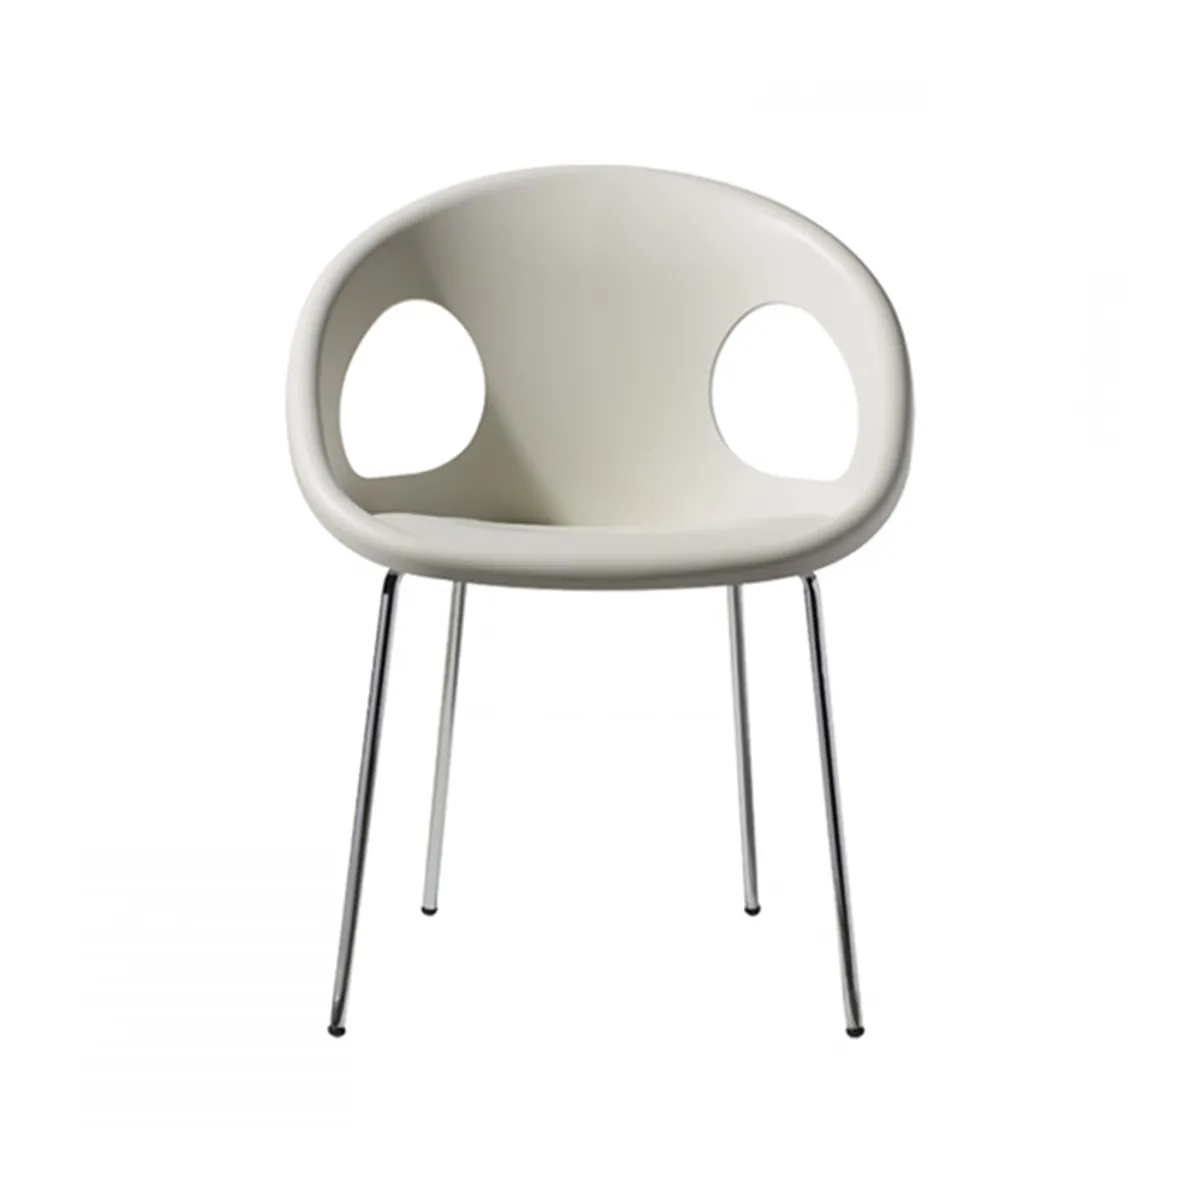 Eclipse Armchair Inside Out Contracts2